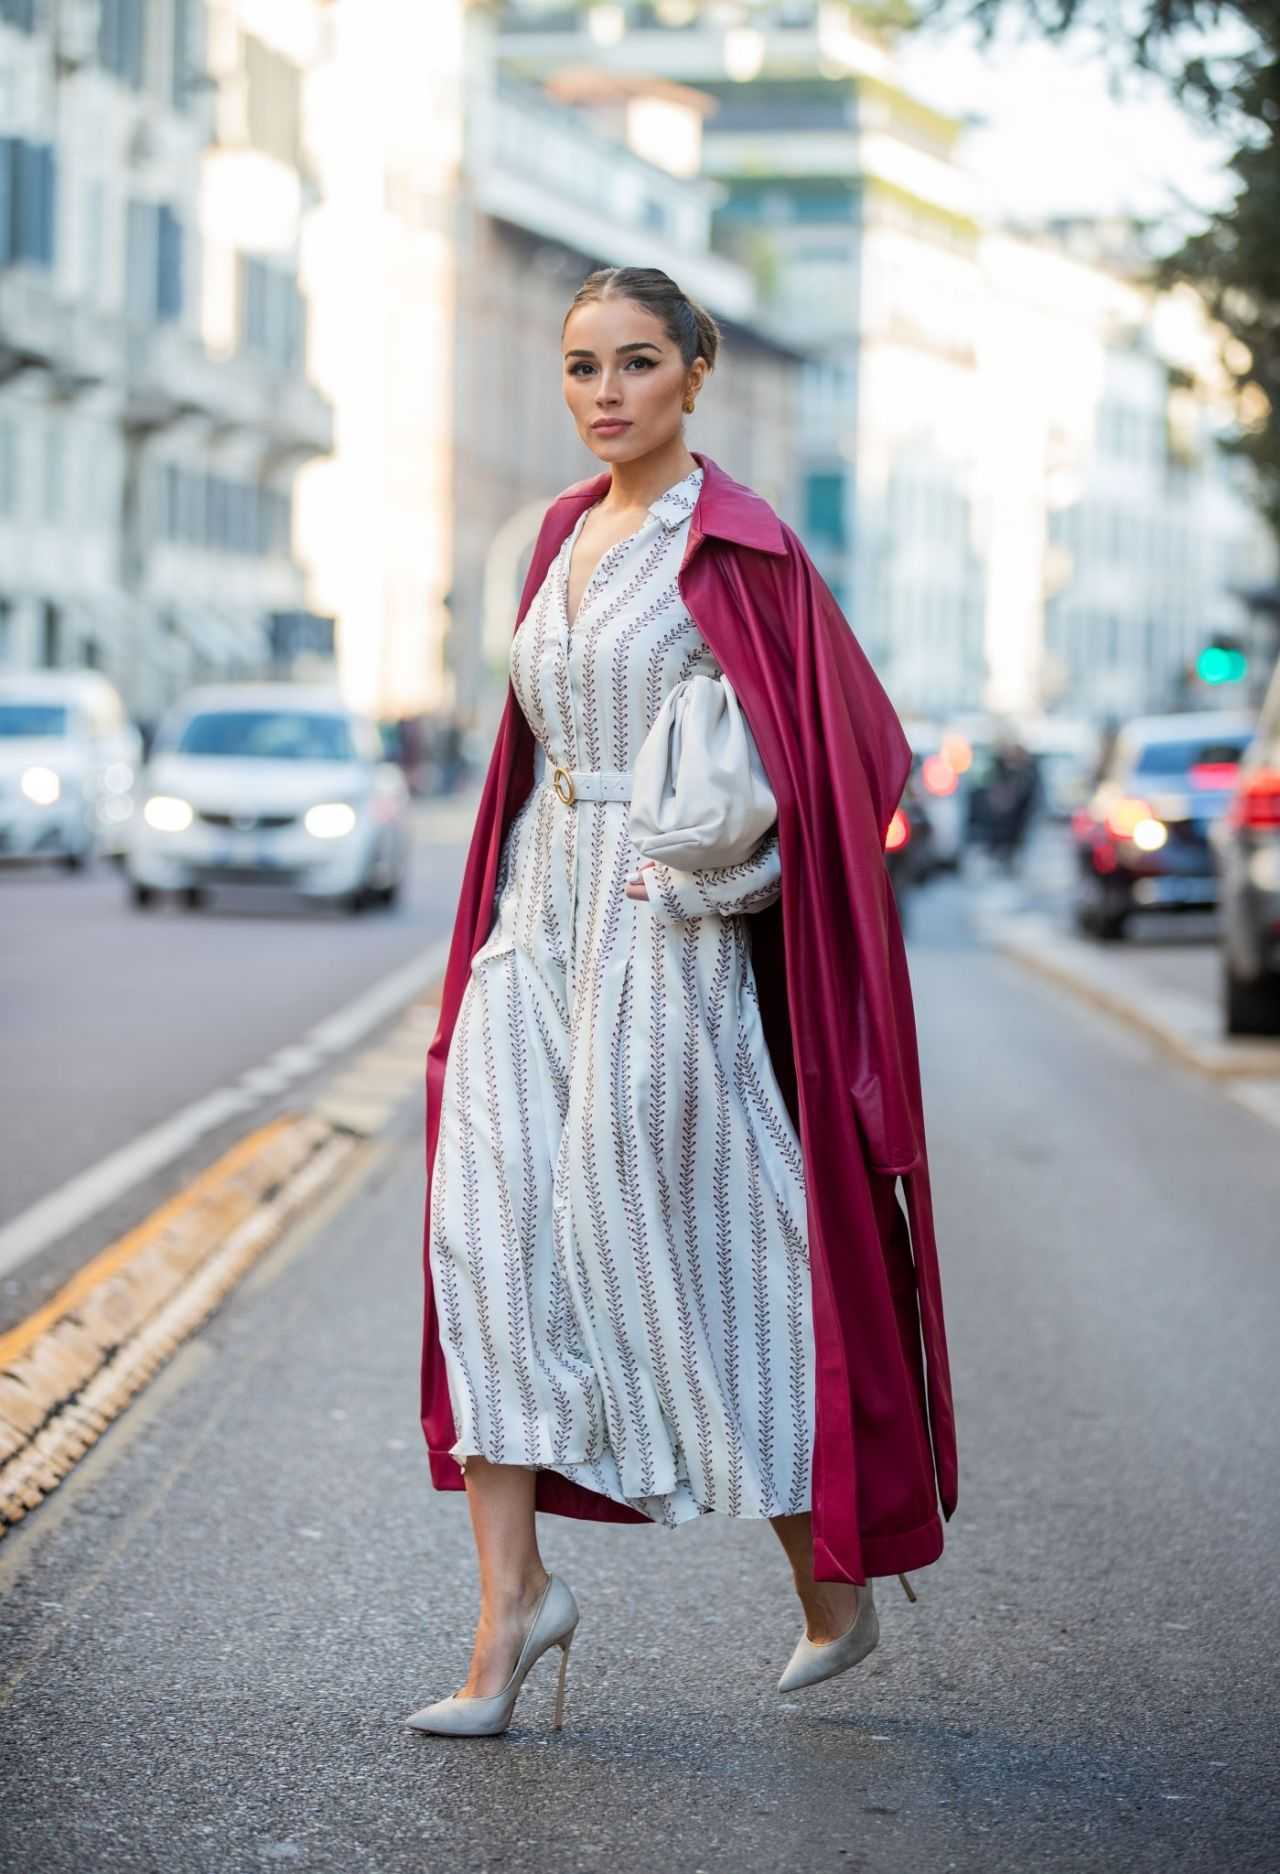 Olivia Culpo â€“ Looks Stylis While Out And About At Milan Fashion Week